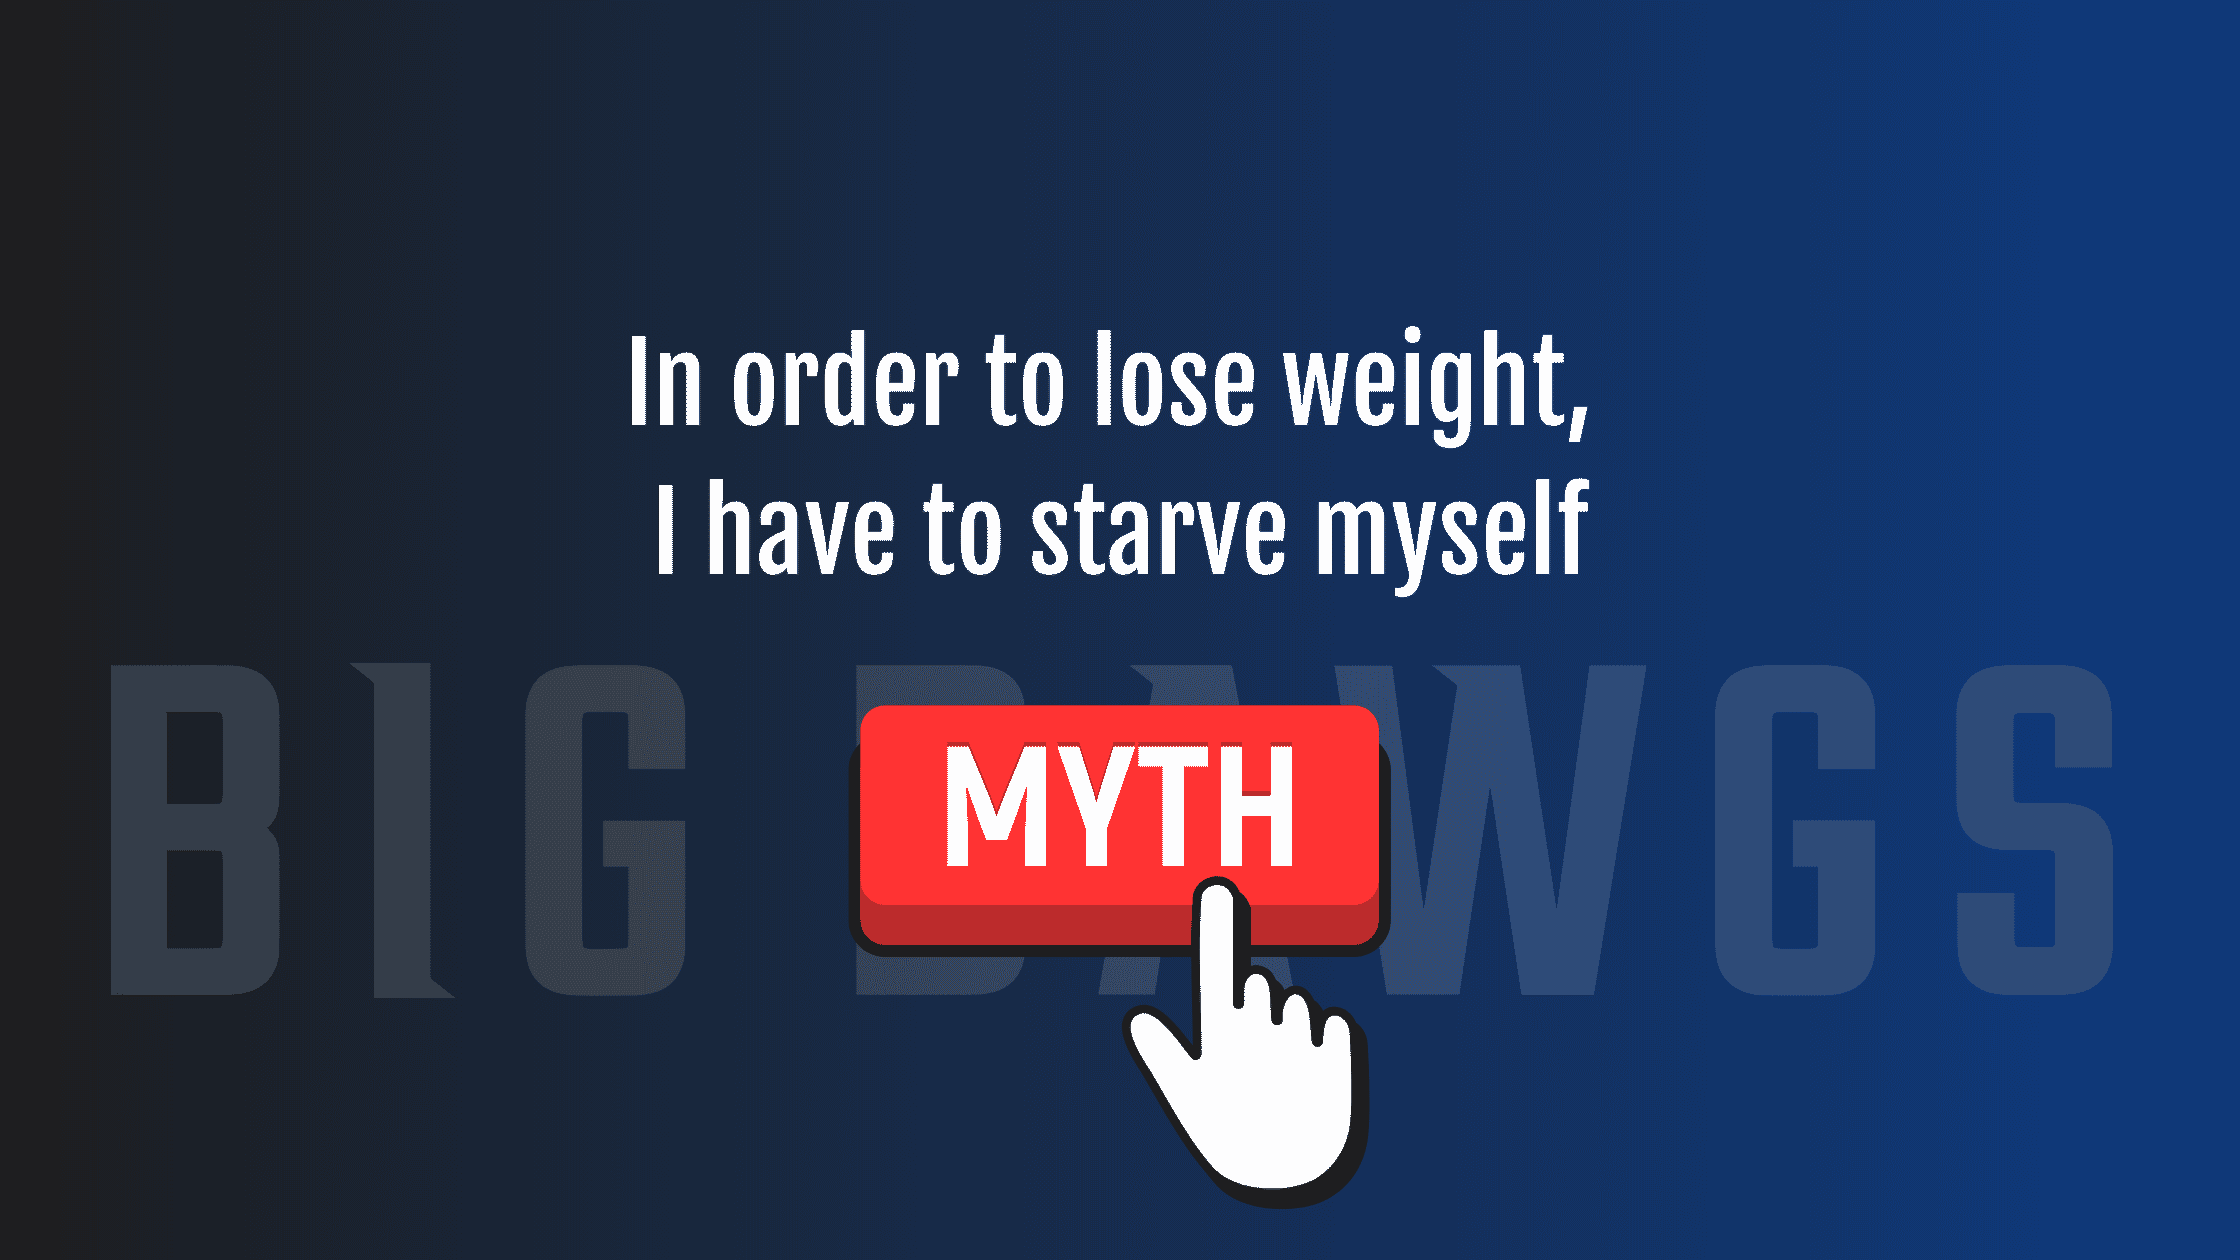 MYTH BUSTER: In order to lose weight, I have to starve myself